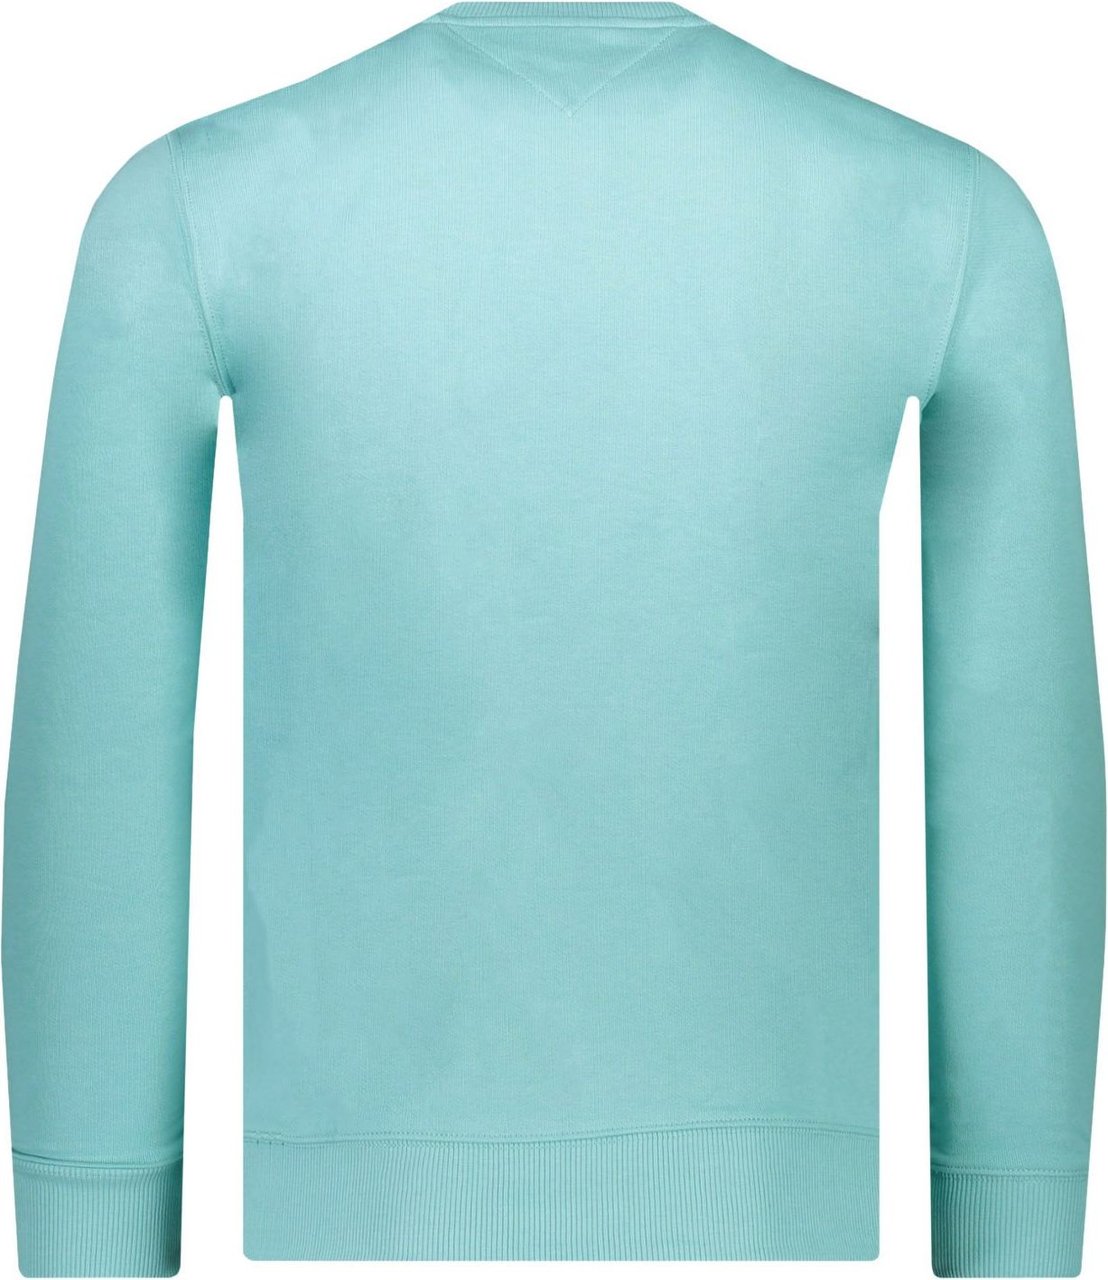 Tommy Hilfiger Sweater Turquoise Blauw